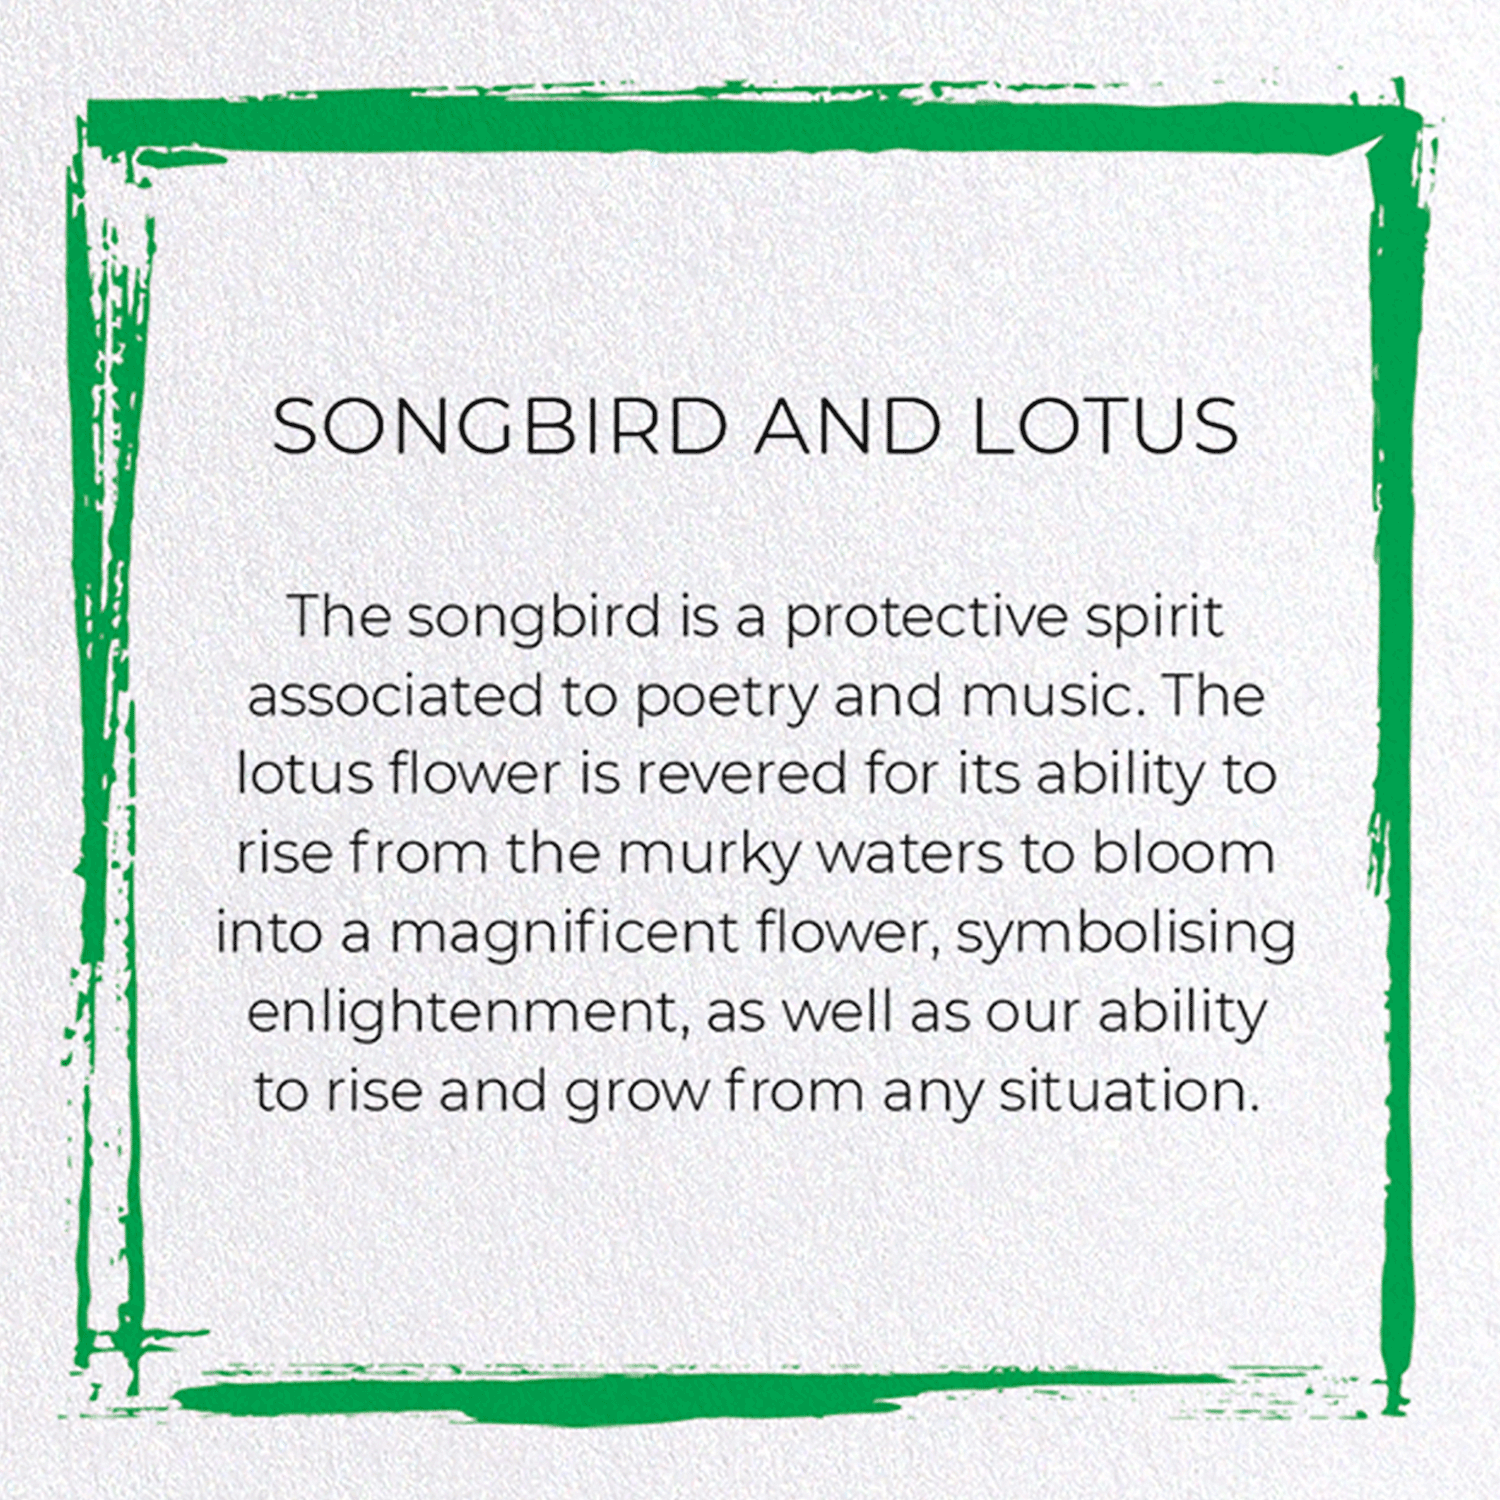 SONGBIRD AND LOTUS